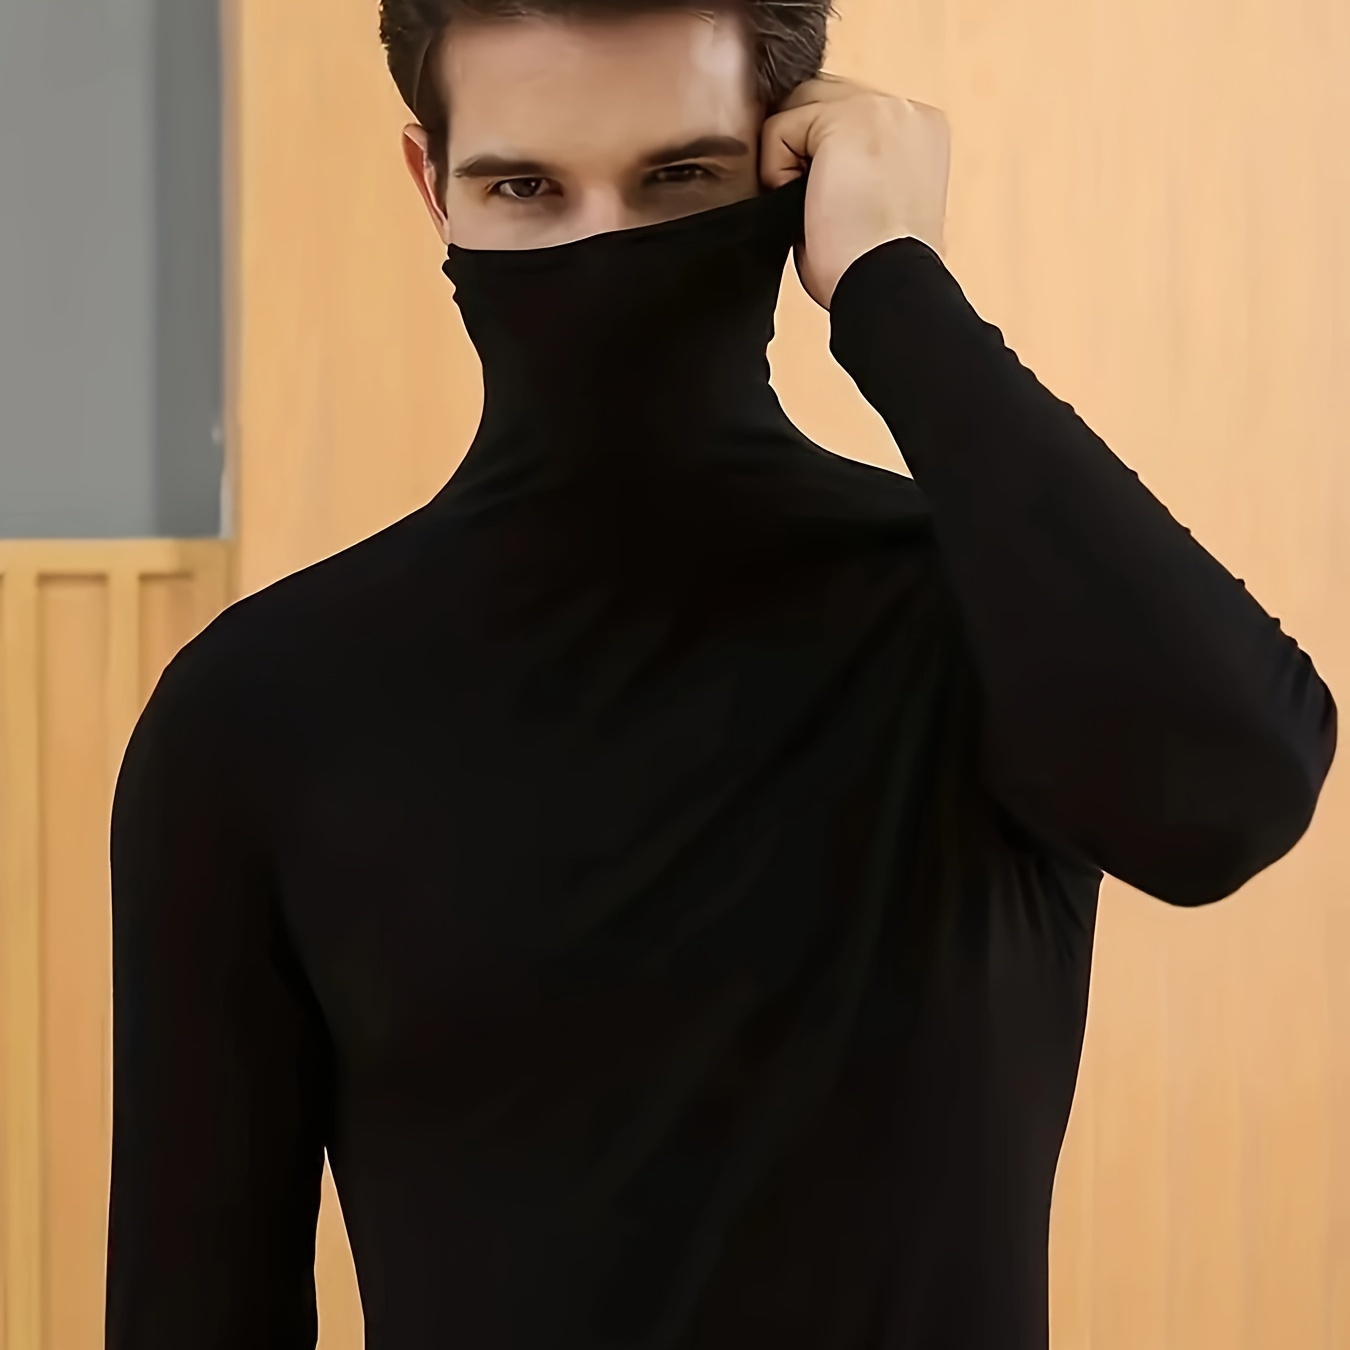 

Men's Casual Loungewear Sportswear Tight Long-sleeved Fitness Clothes, Night Running Equipment Cycling Scarf Sunscreen Dustproof High-elastic Quick-drying Top